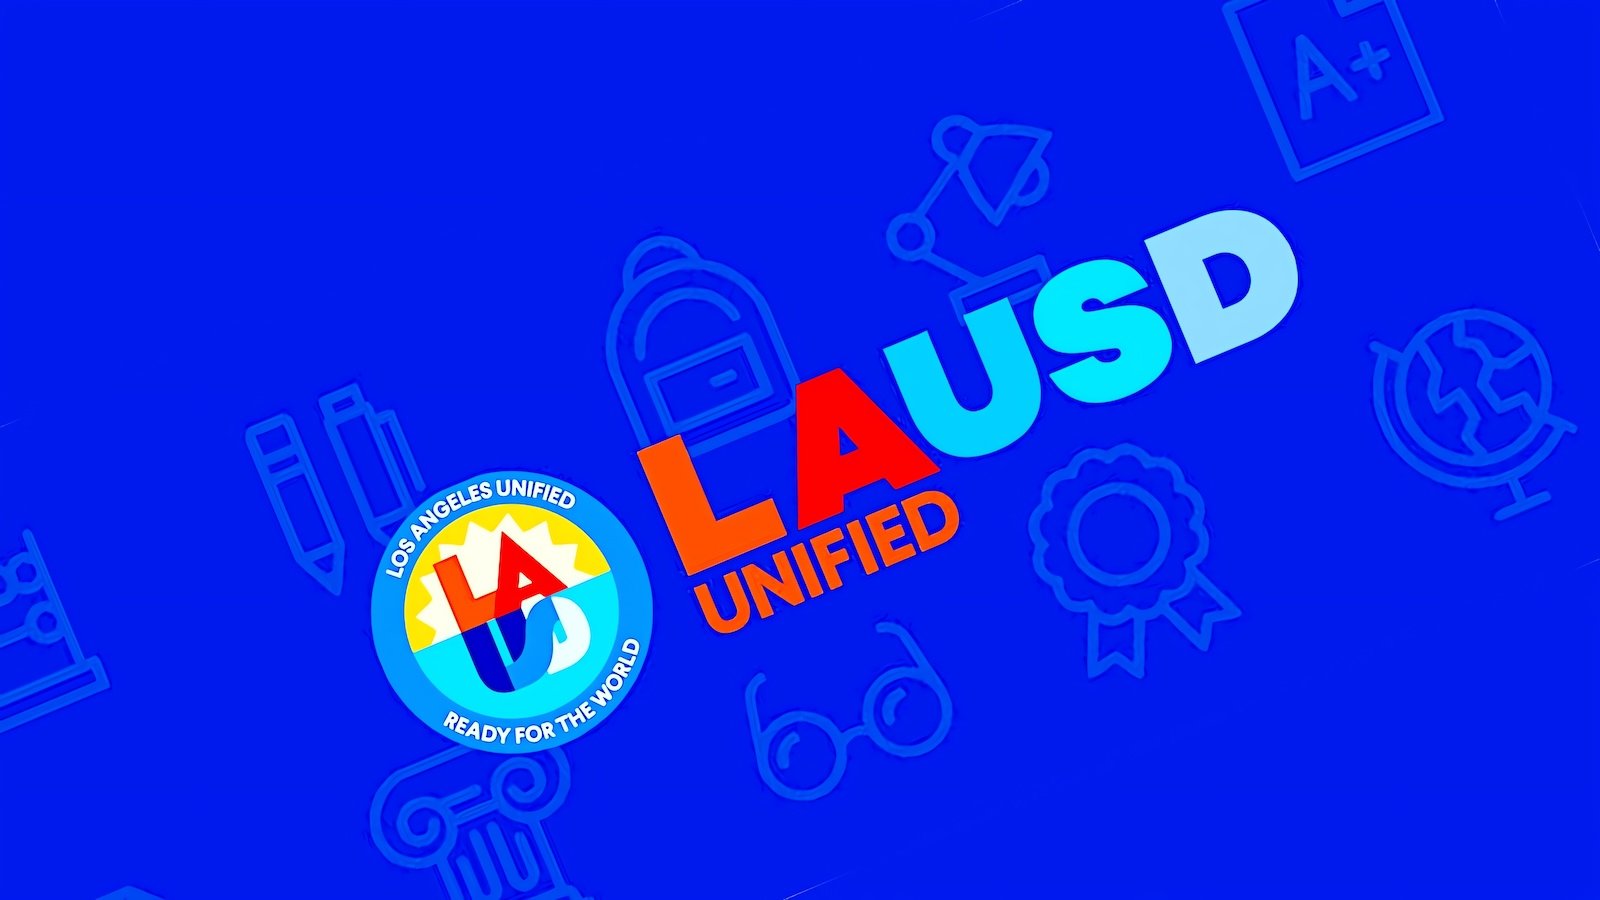 Los Angeles Unified School District (LAUSD)